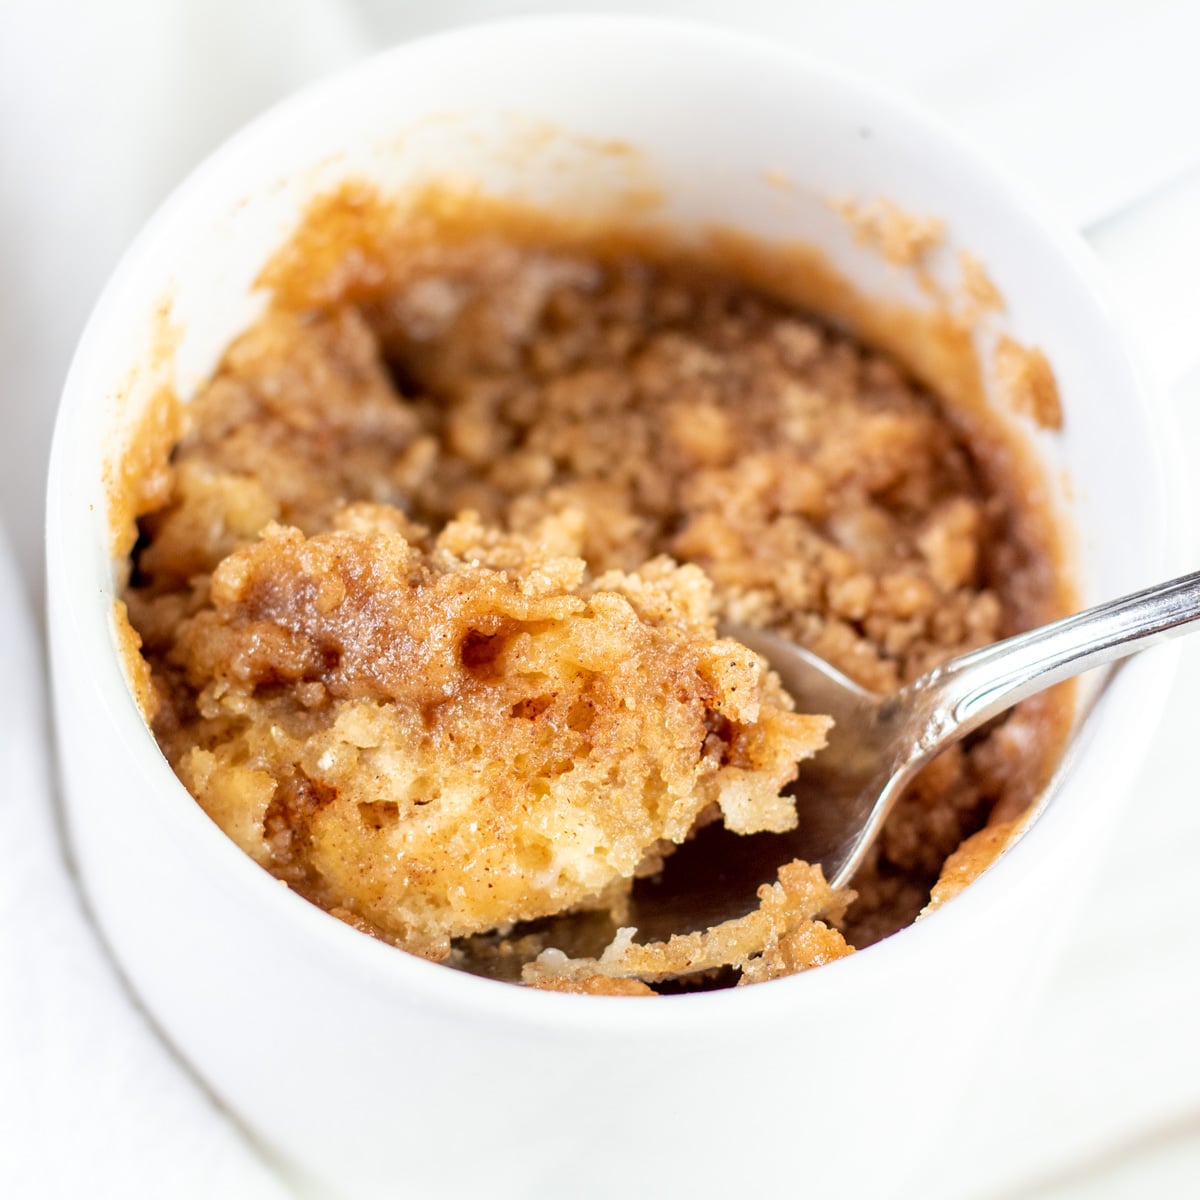 Tasty cinnamon coffee cake mug cake dessert after cooking for under 2 minutes in the microwave.